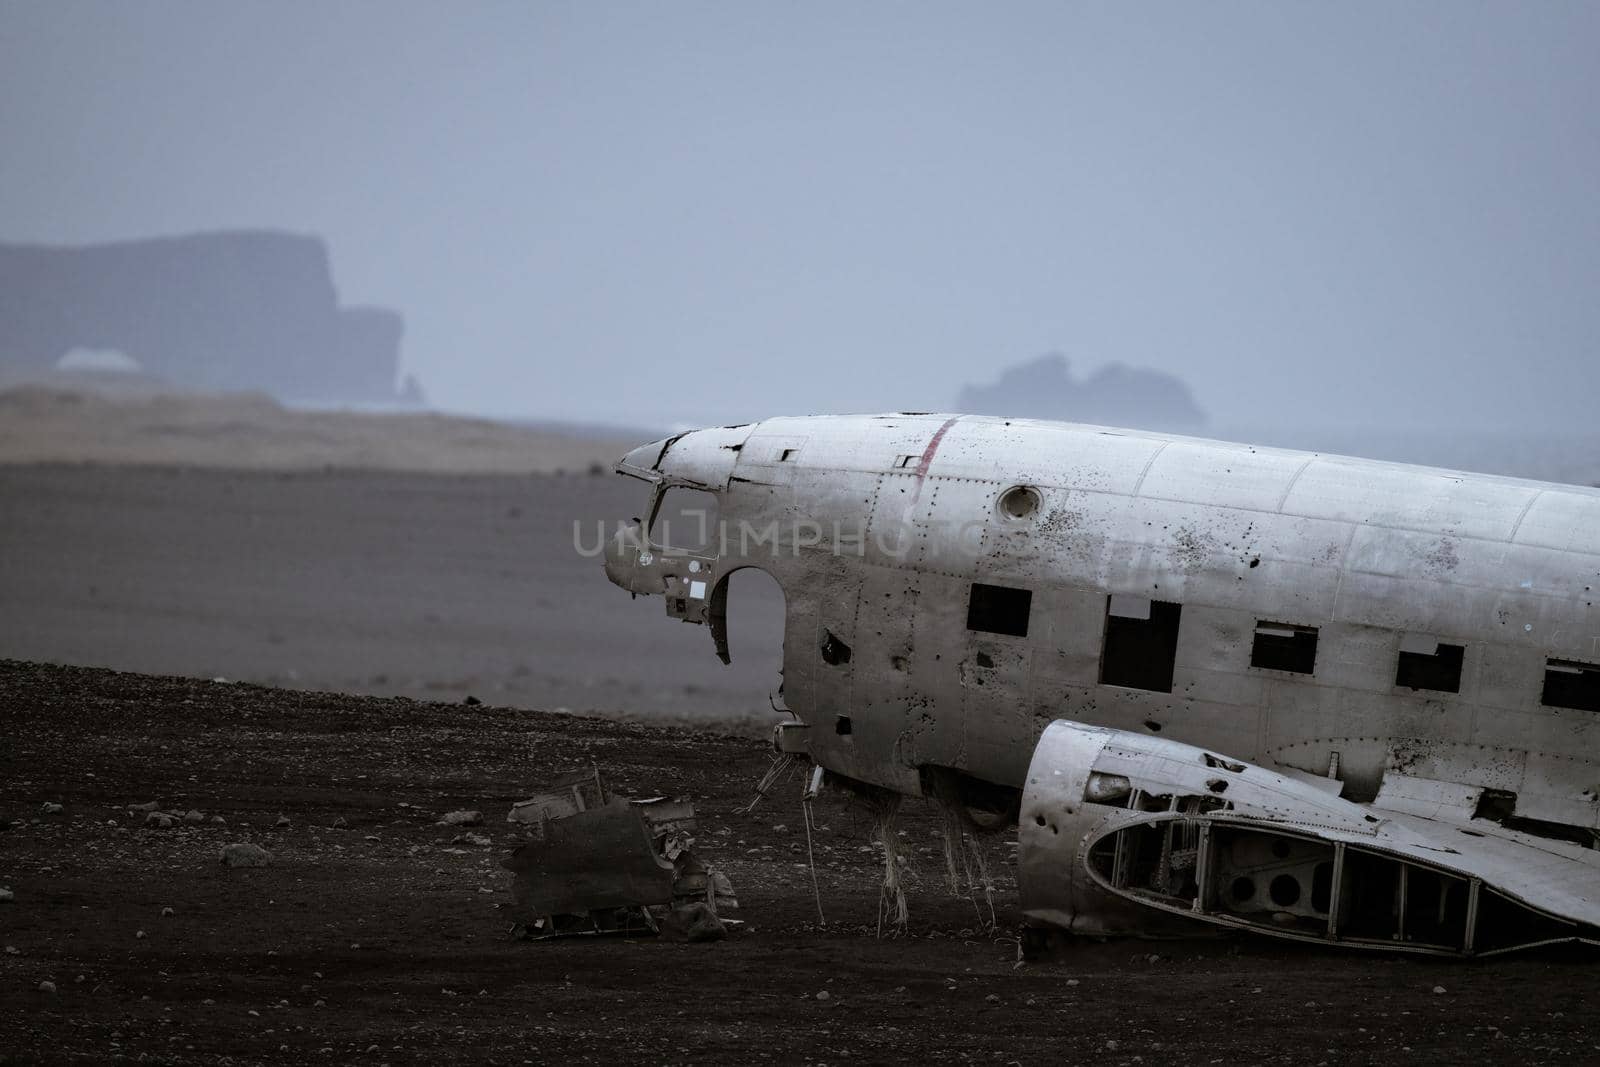 Wreck of and airplane profile, foggy day by FerradalFCG